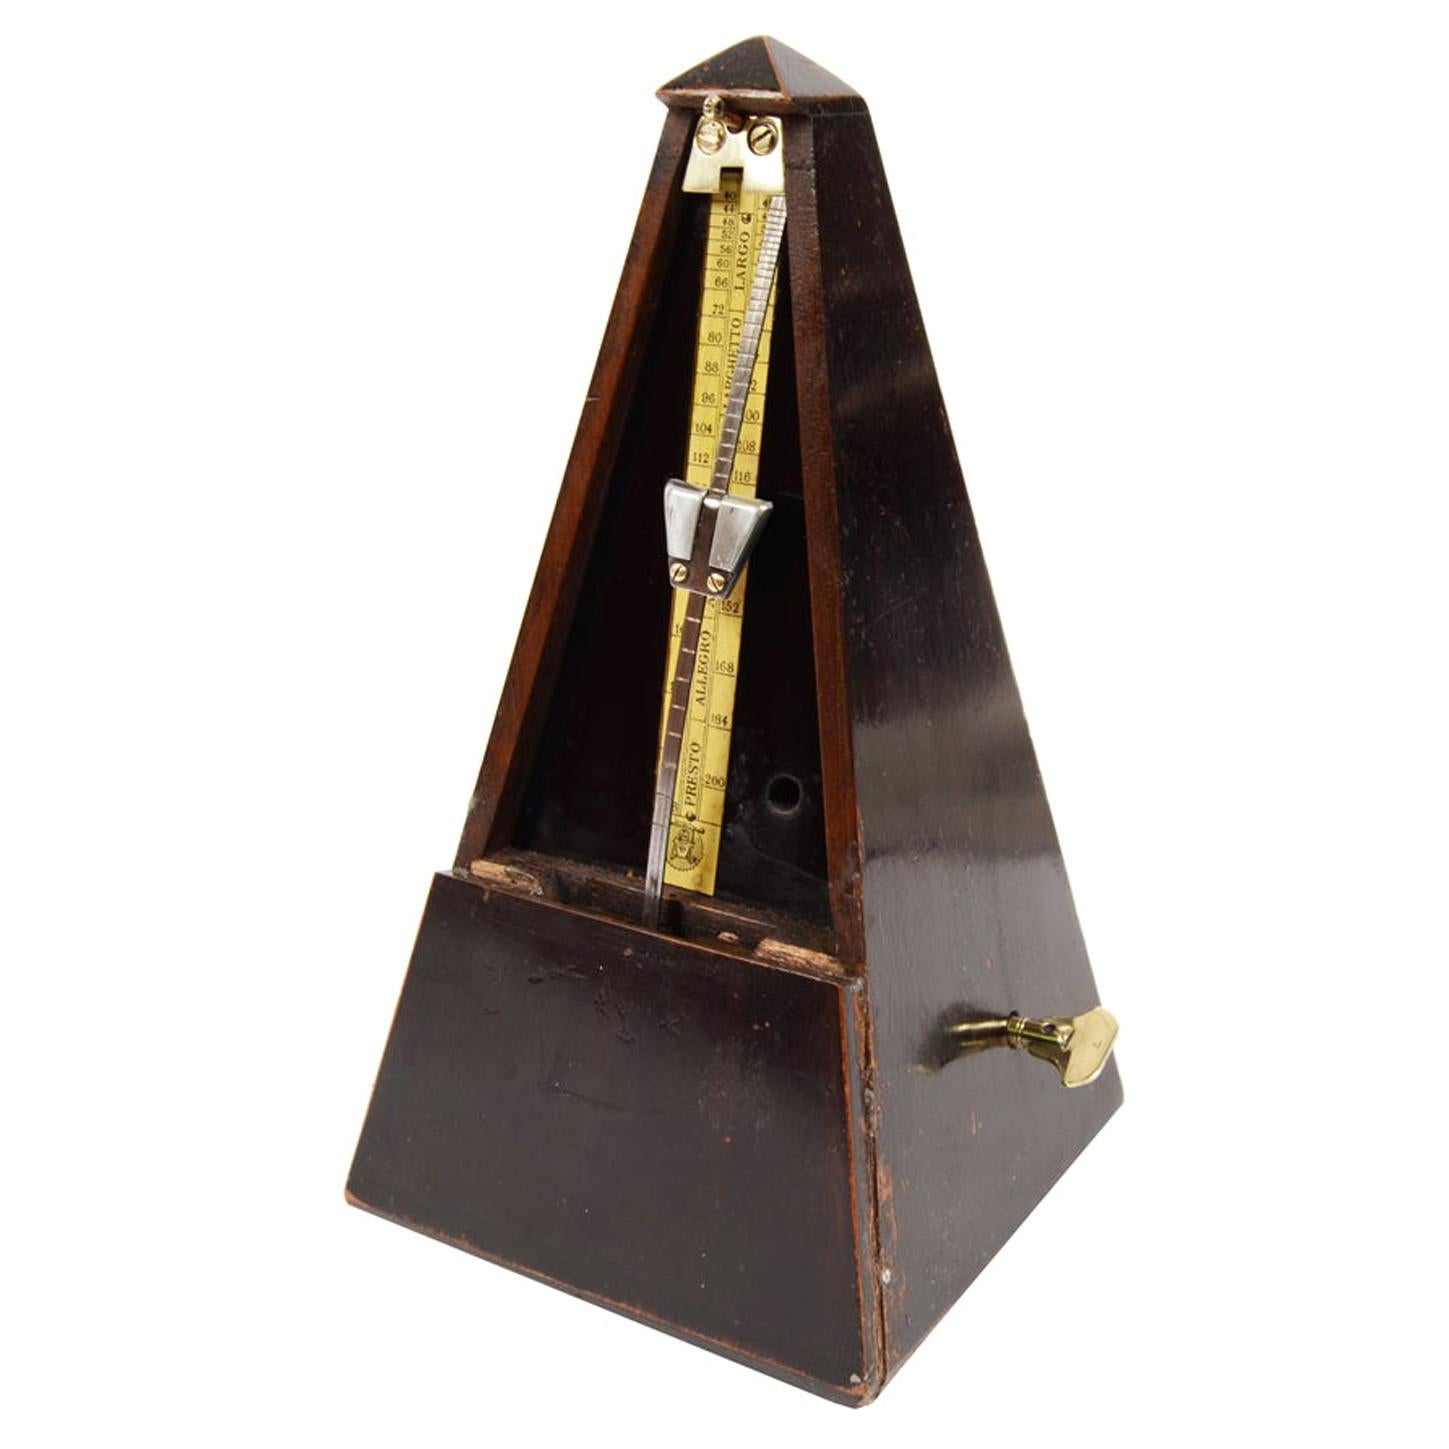 Metronome Johan Maelzel Antique Musical Measuring Instrument made in Early 1900s